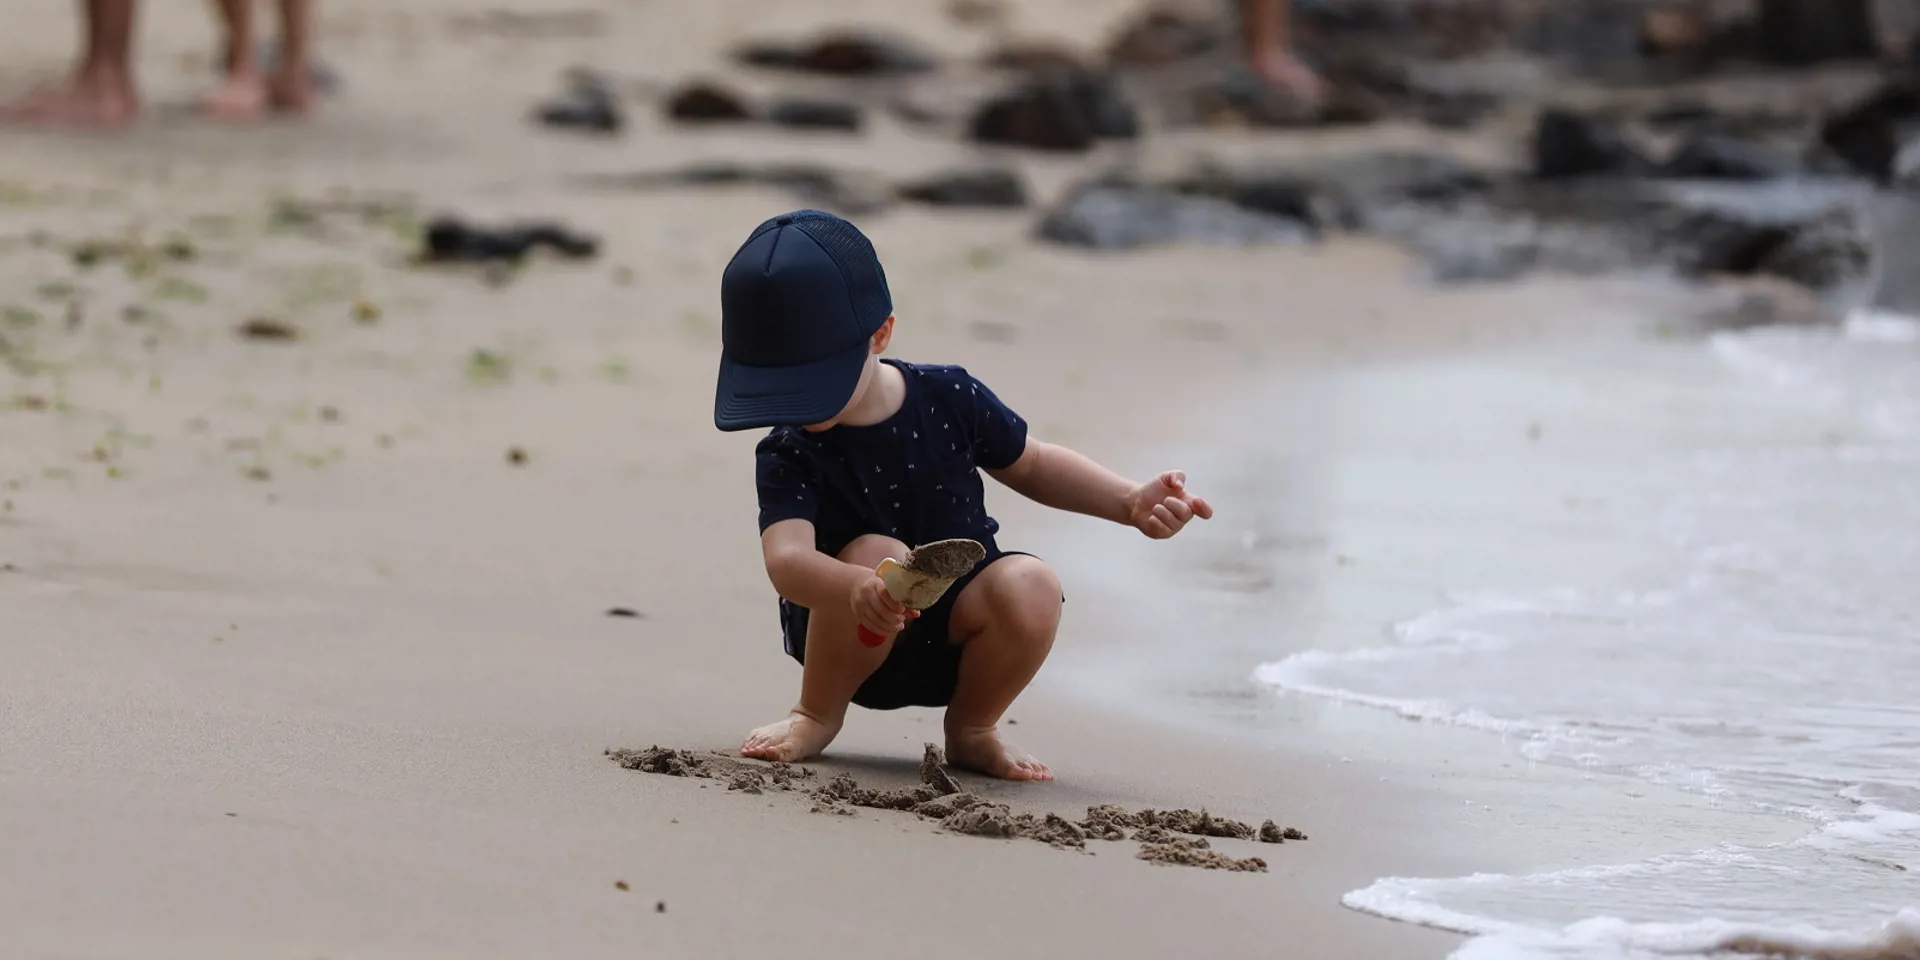 little boy playing with sand on a beach